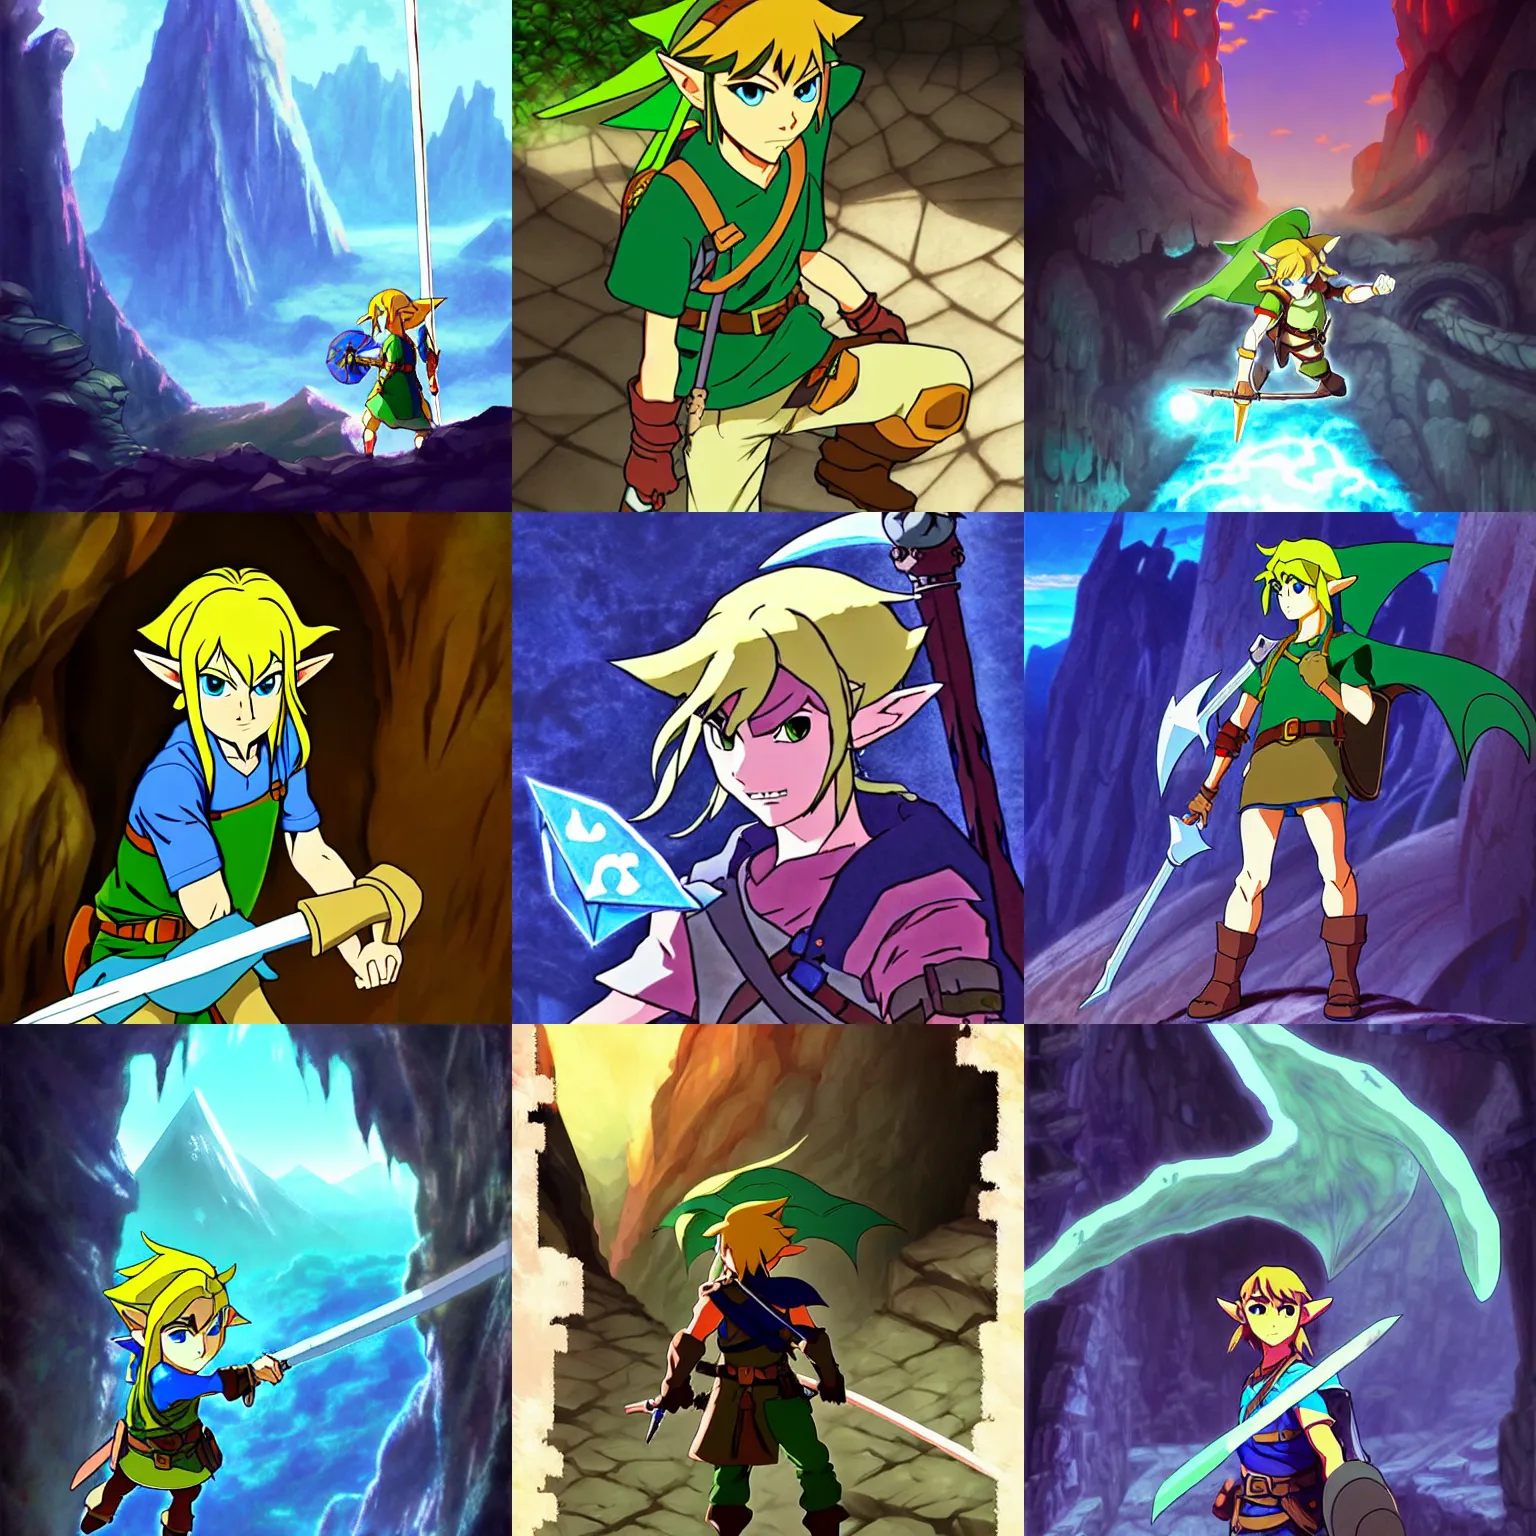 Prompt: link in a cave, legend of zelda, mature, dark, dungeons and dragons, dragon's lair, in the anime style of makoto shinkai, katsuhiro otomo, don bluth, key art